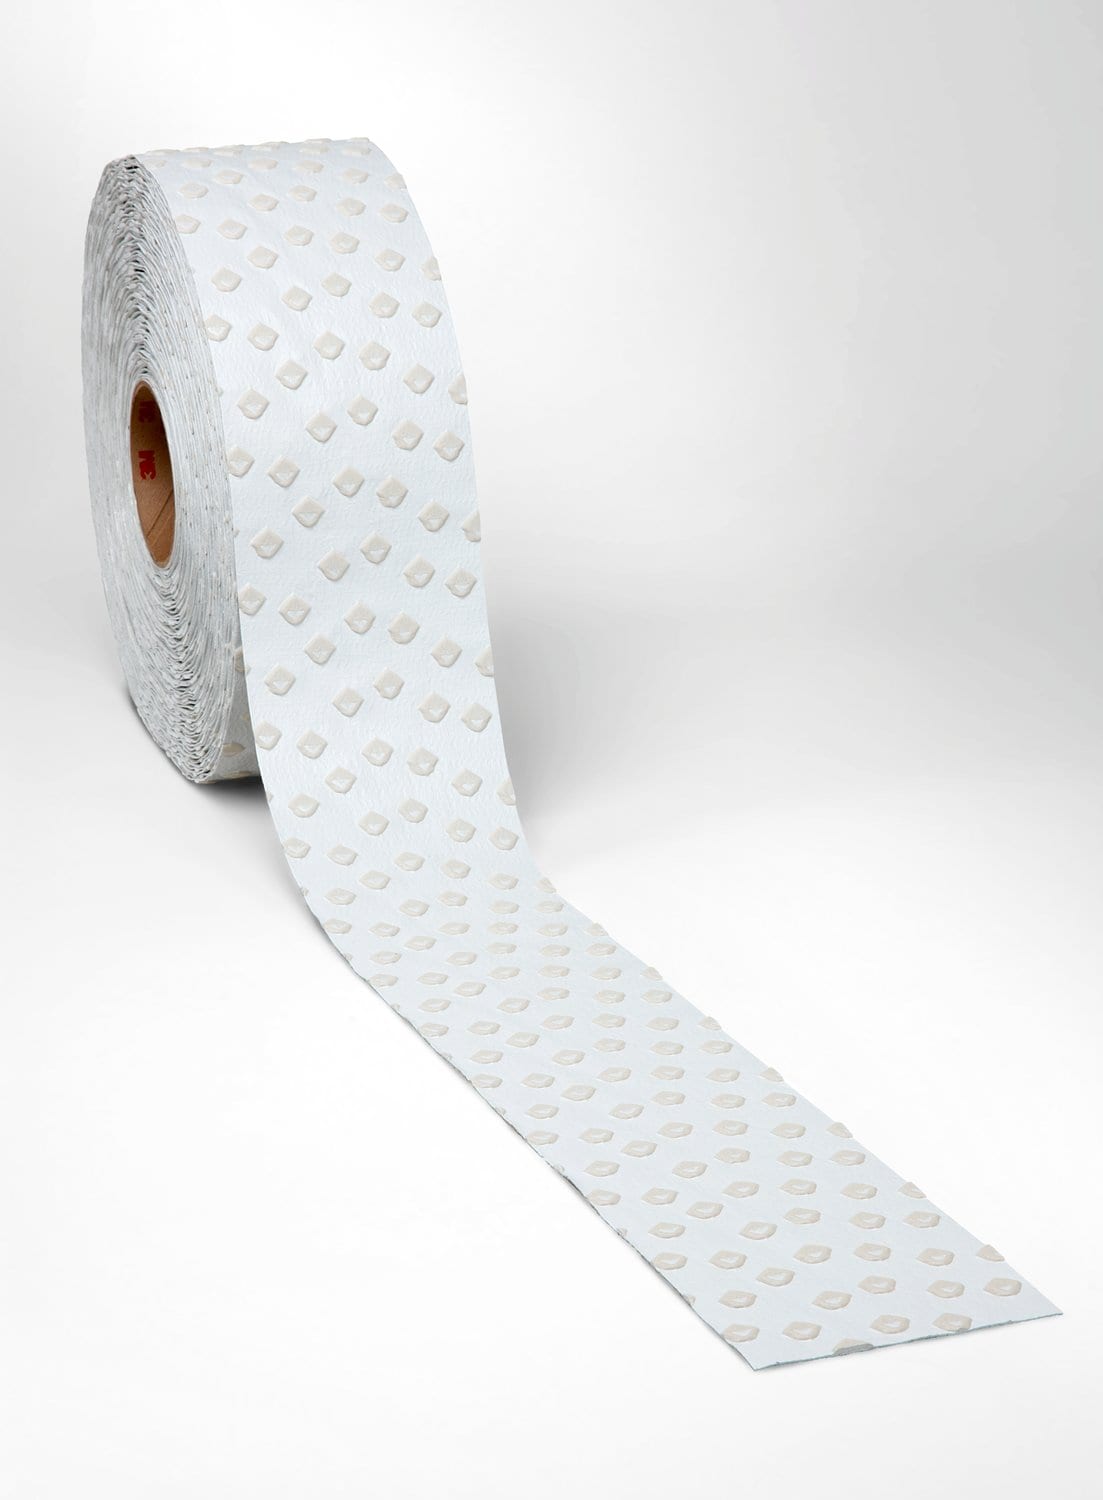 7100192212 - 3M Stamark Removable Pavement Marking Tape L710-5, White/Black,
Fabricated, Configurable Roll